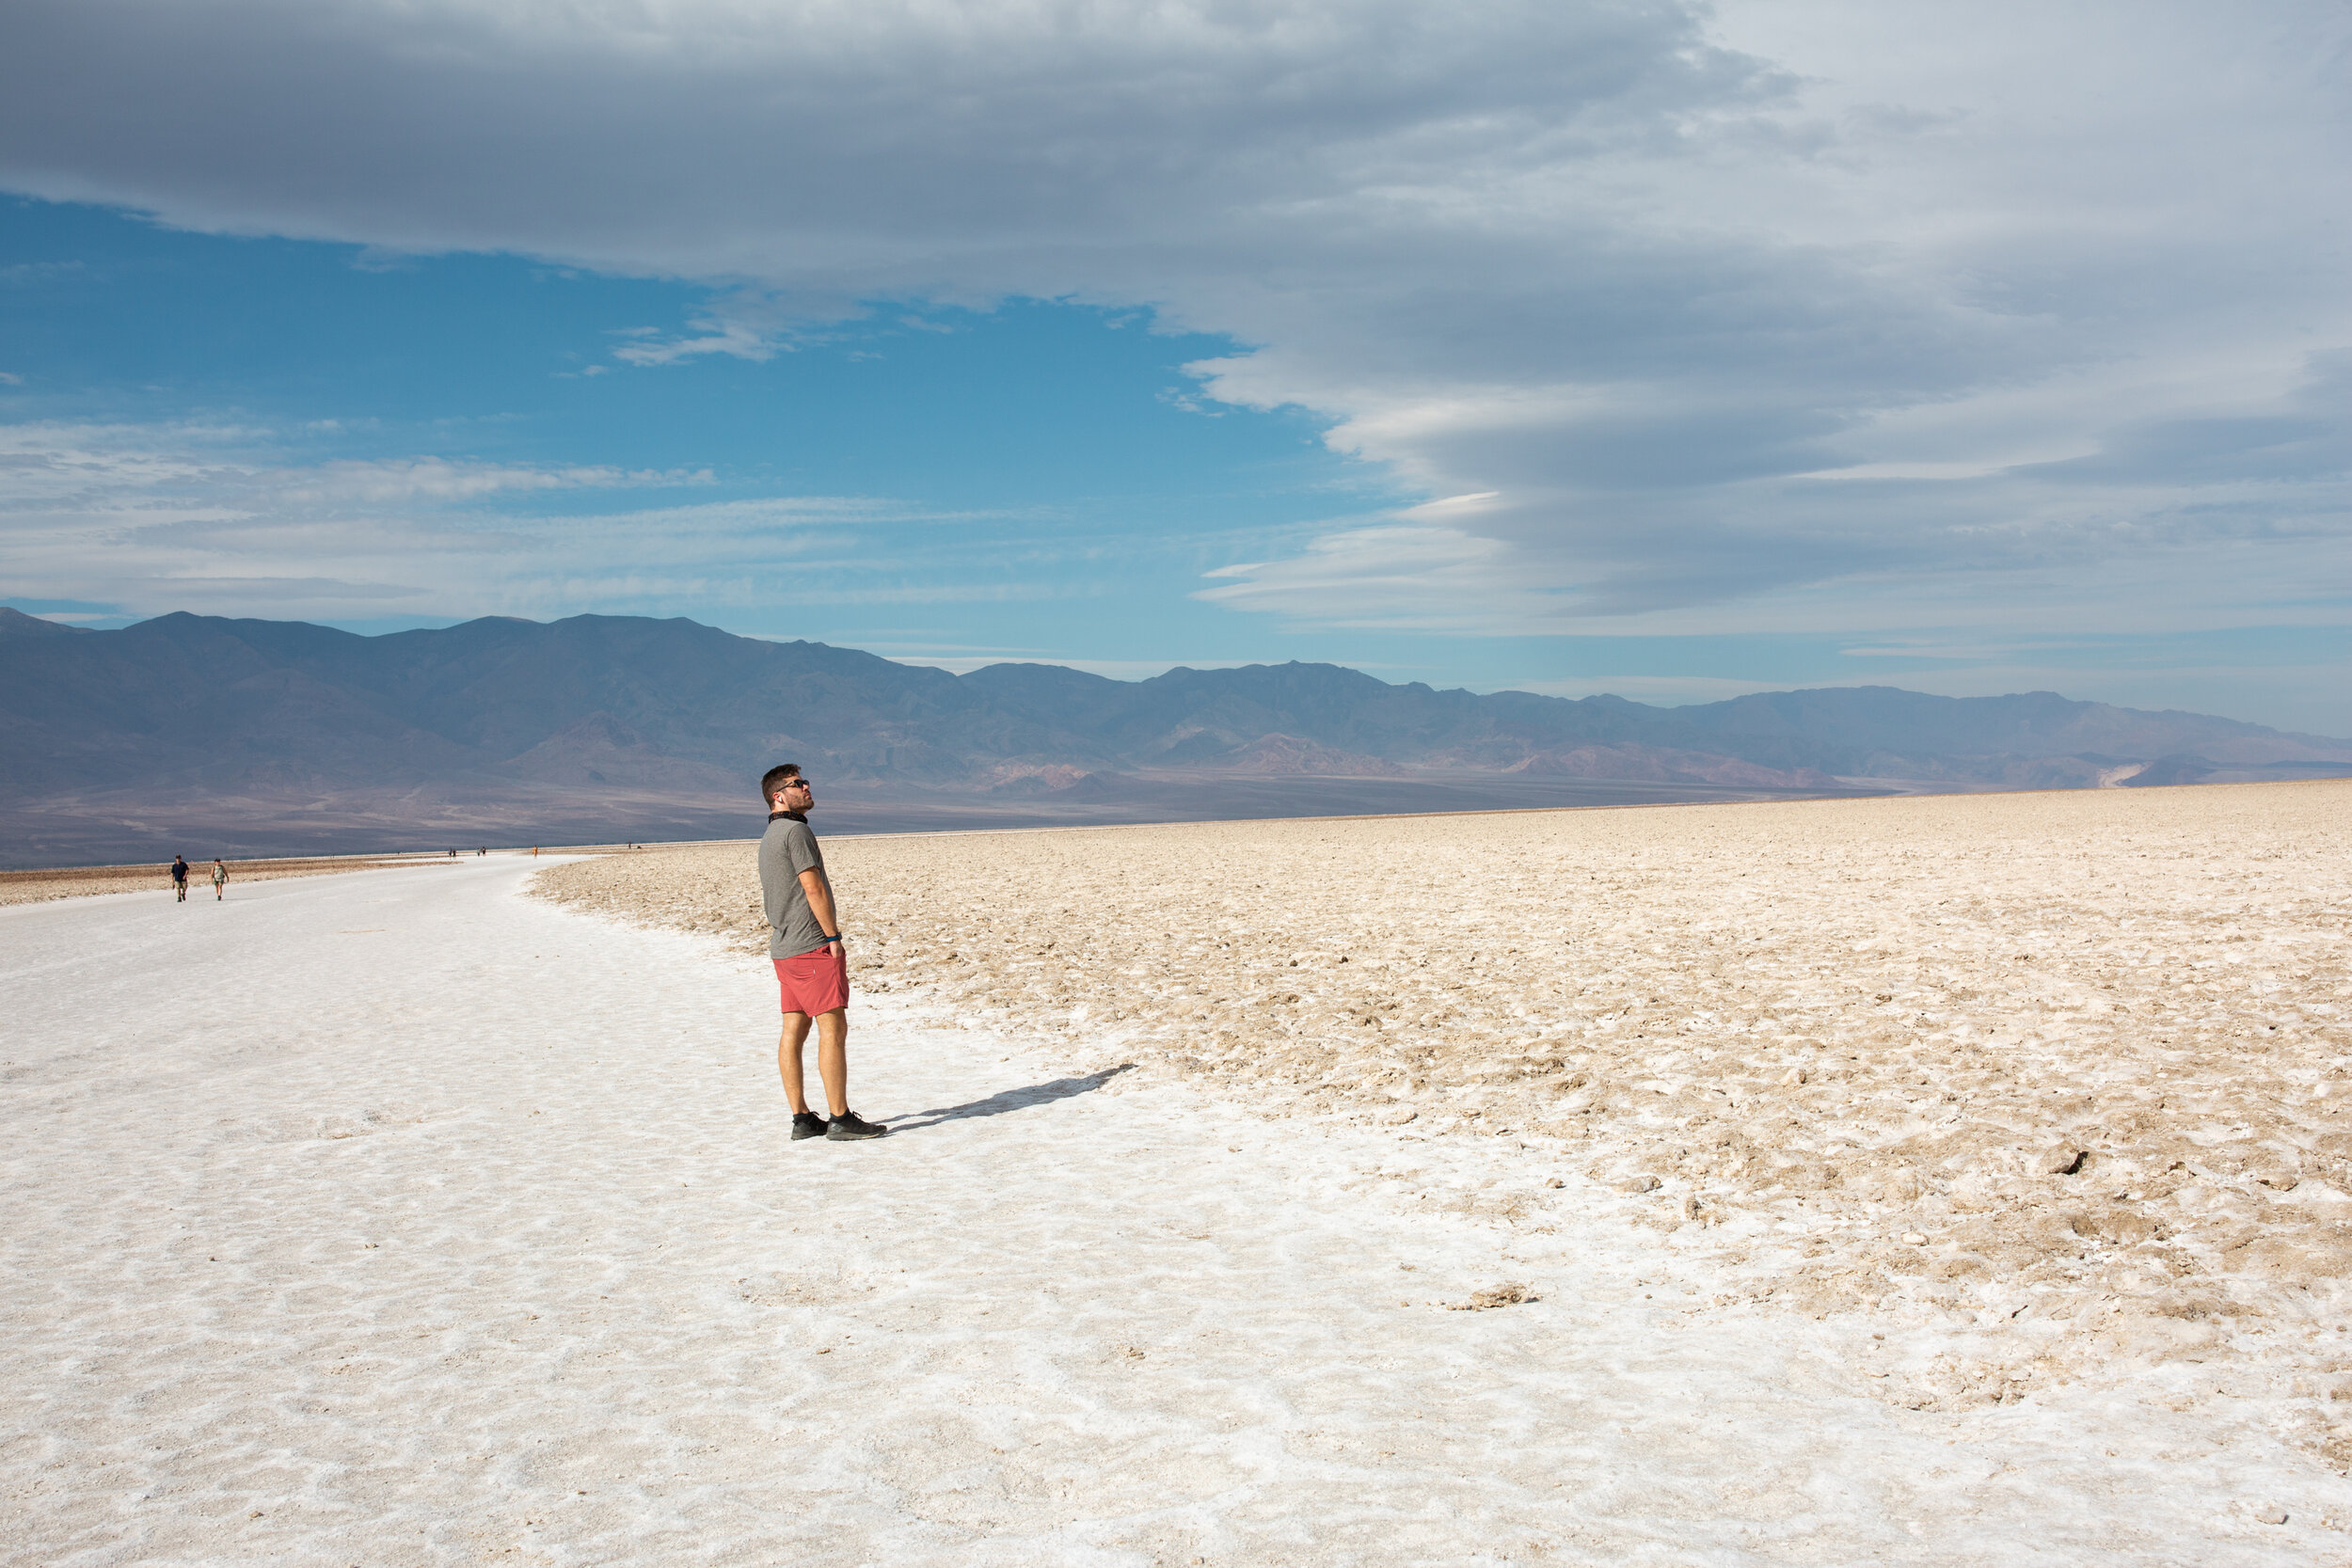 Explore Badwater Basin, The Lowest Point In North America